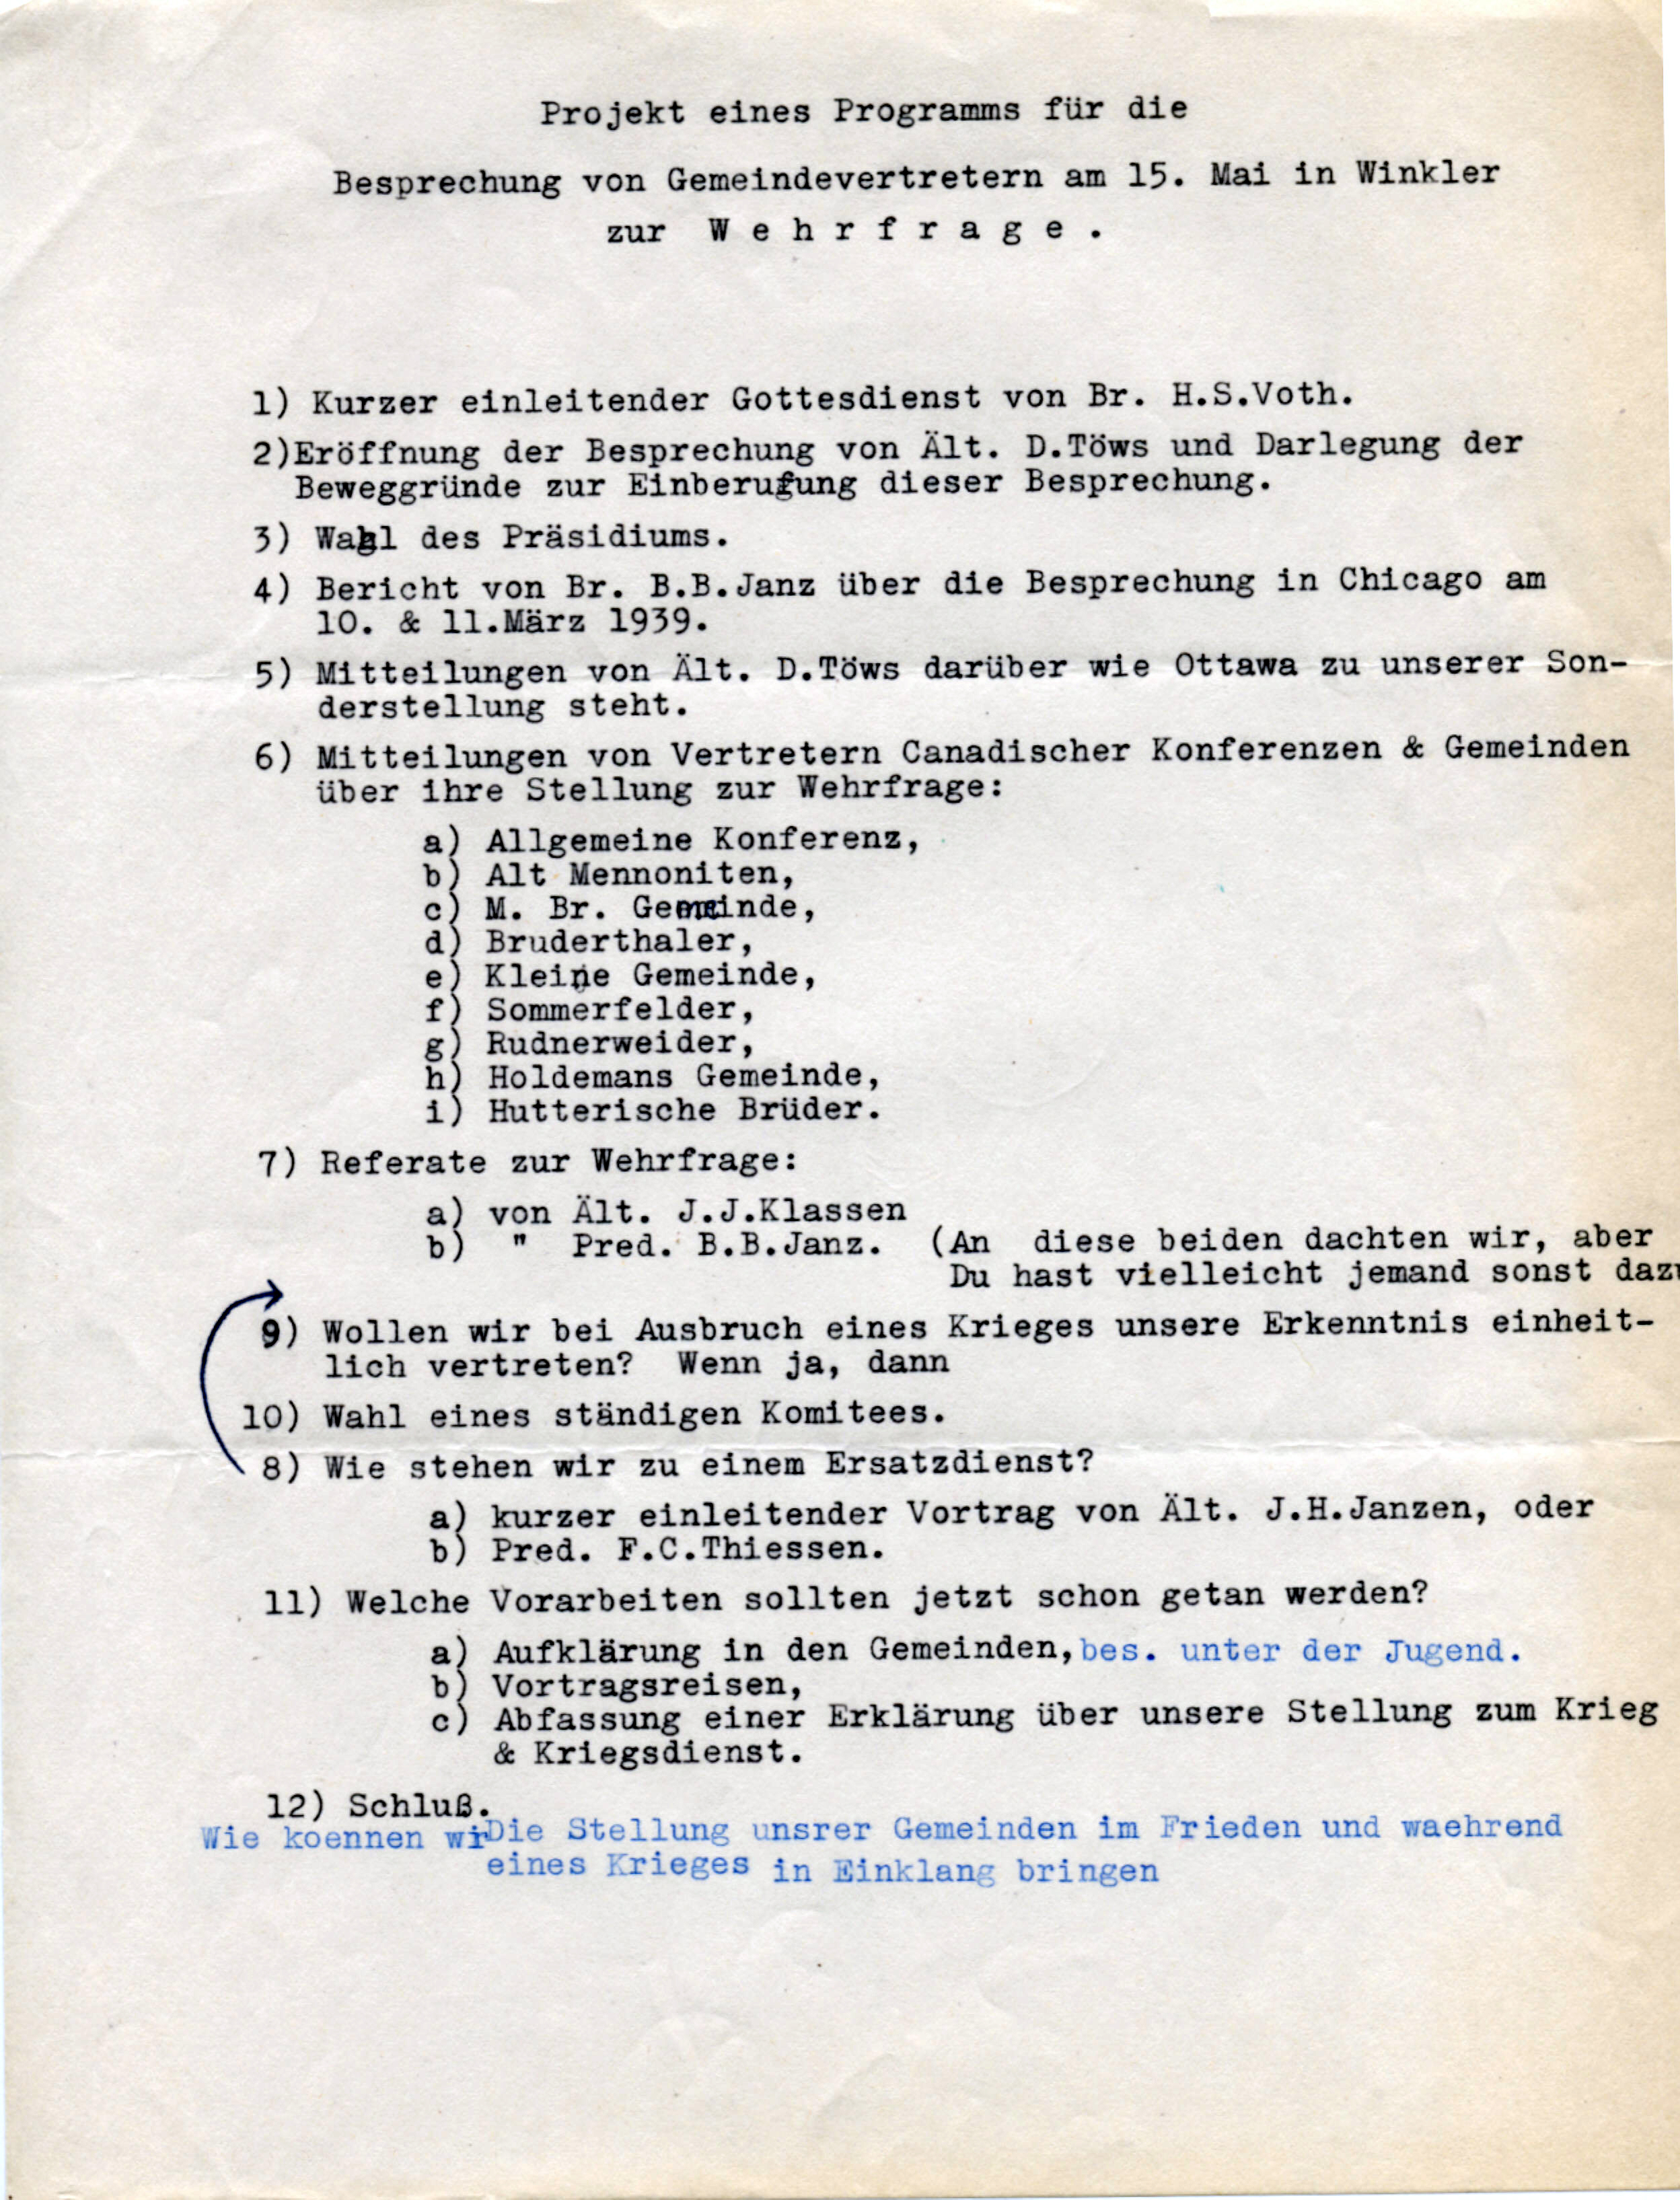 Program for the meeting in Winkler 15 May 1939 in Canadian Mennonite Board of Colonization fonds MHC vol 1321 file 927